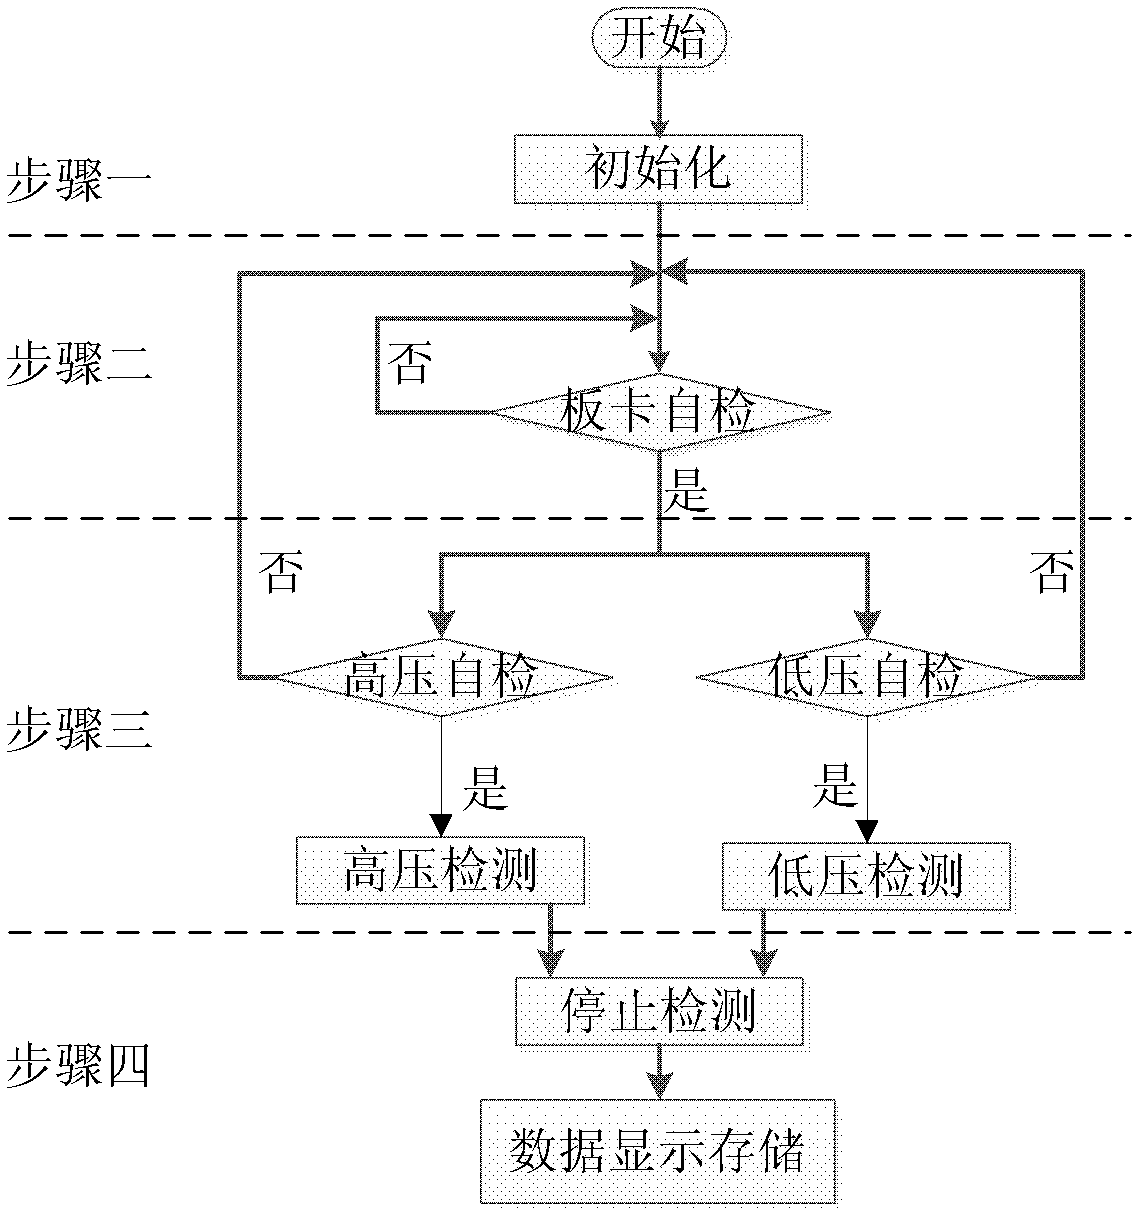 Intelligent initiating explosive device equivalent device and pulse timing sequence signal measurement method